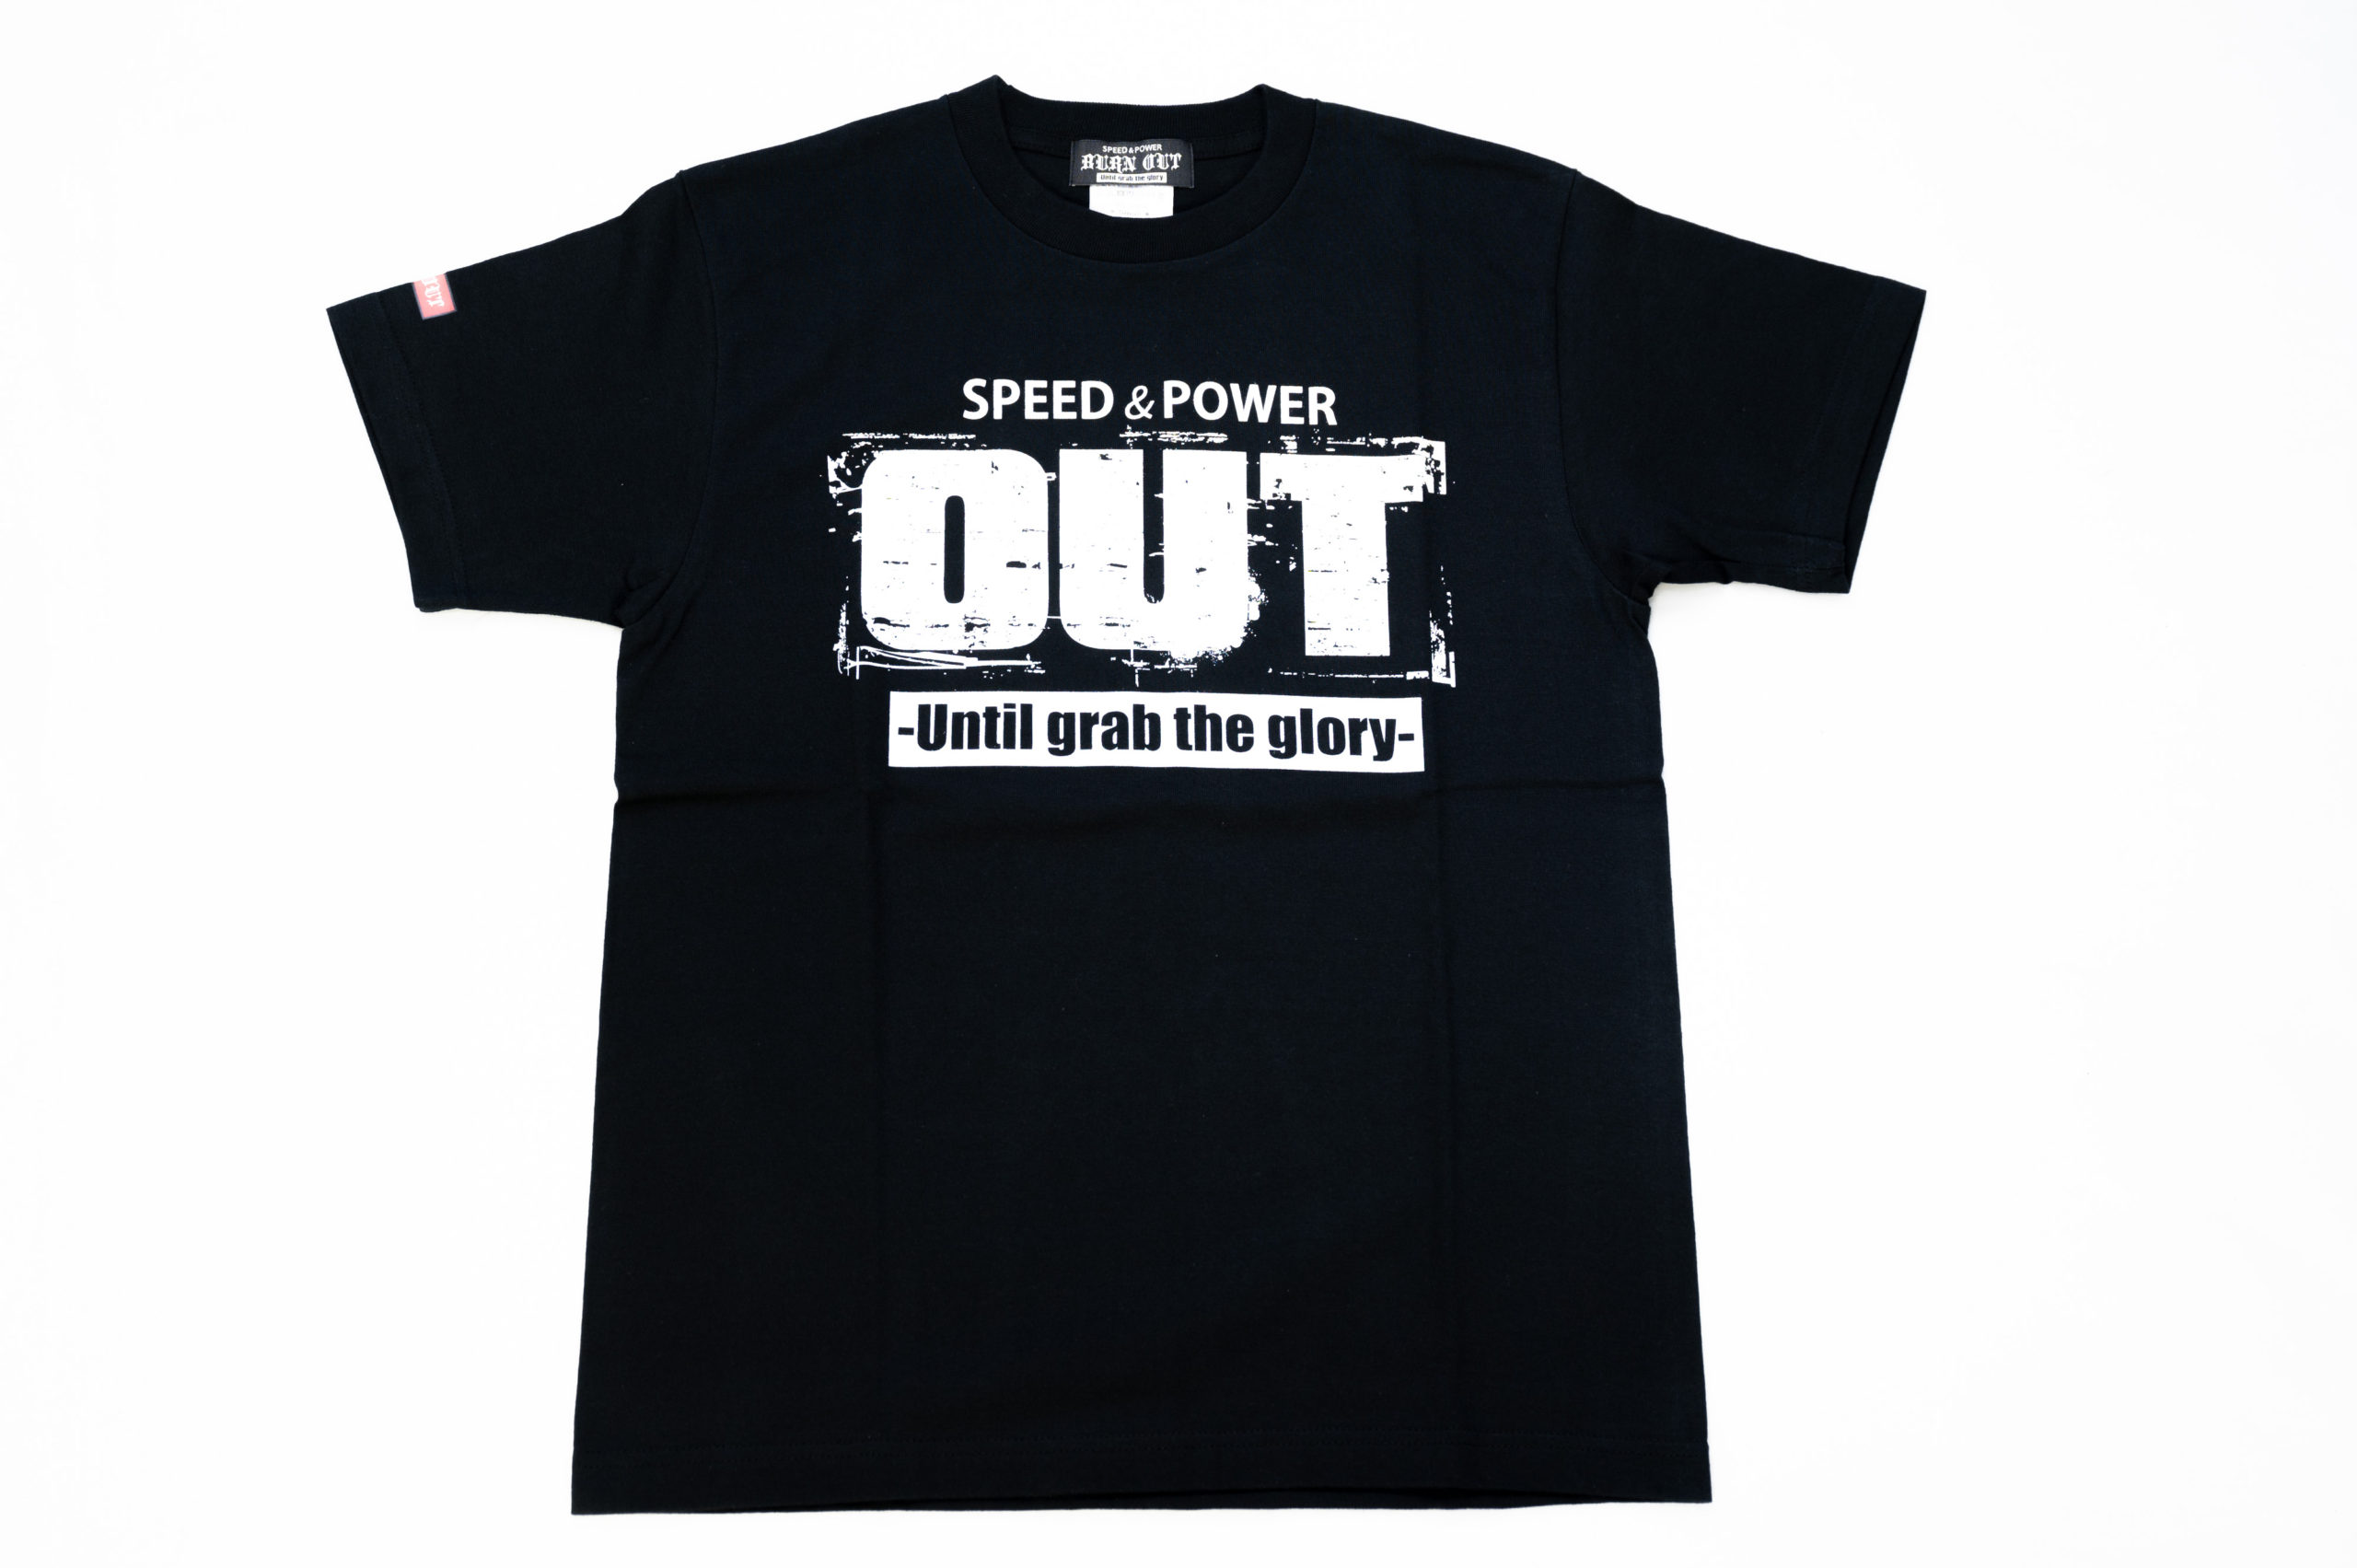 OUT-T-0001-BK